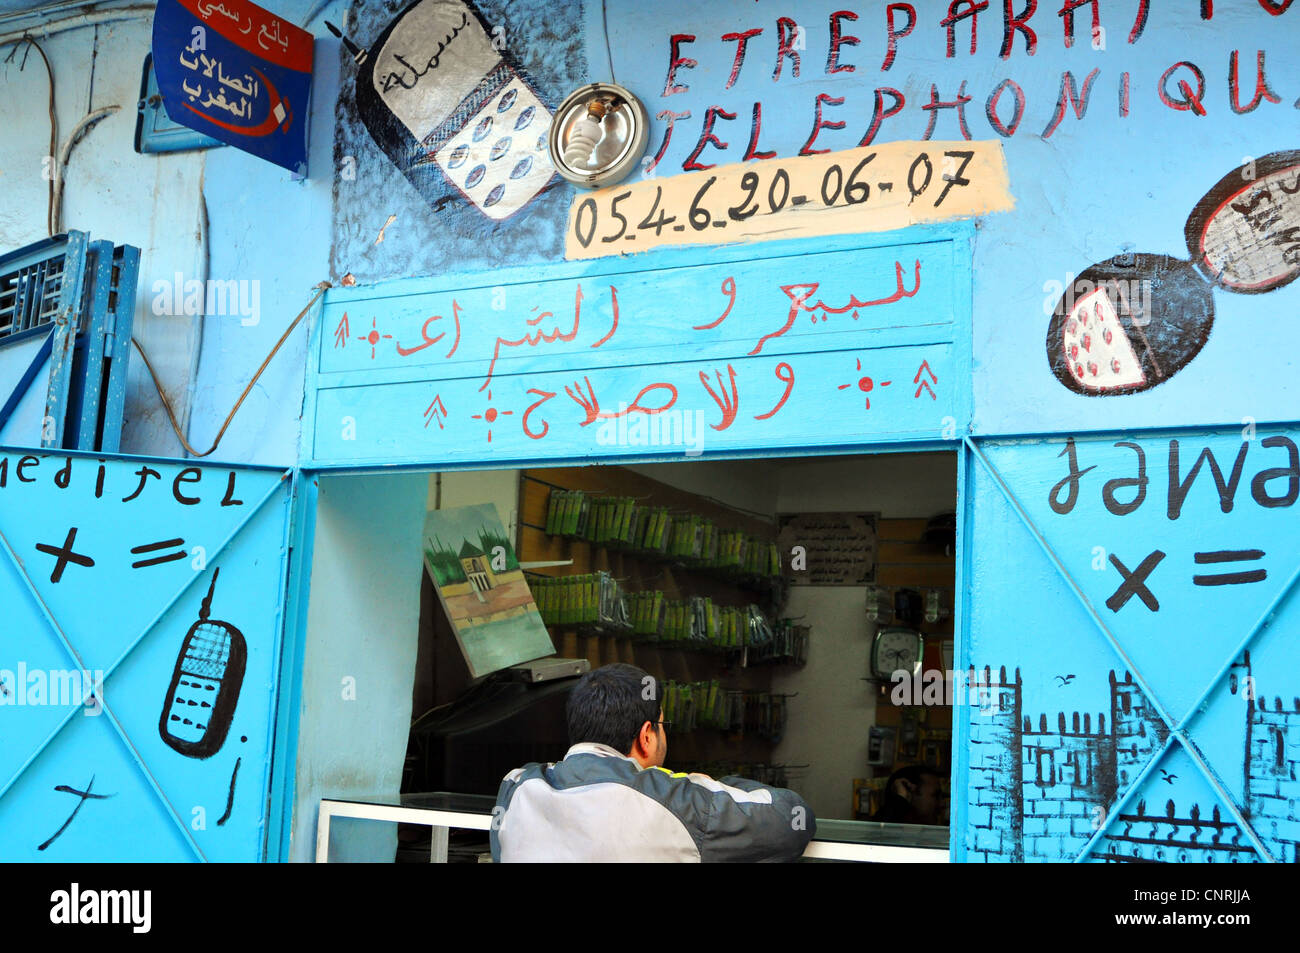 Mobile phone shop, Marrakesh, Morocco North Africa Stock Photo